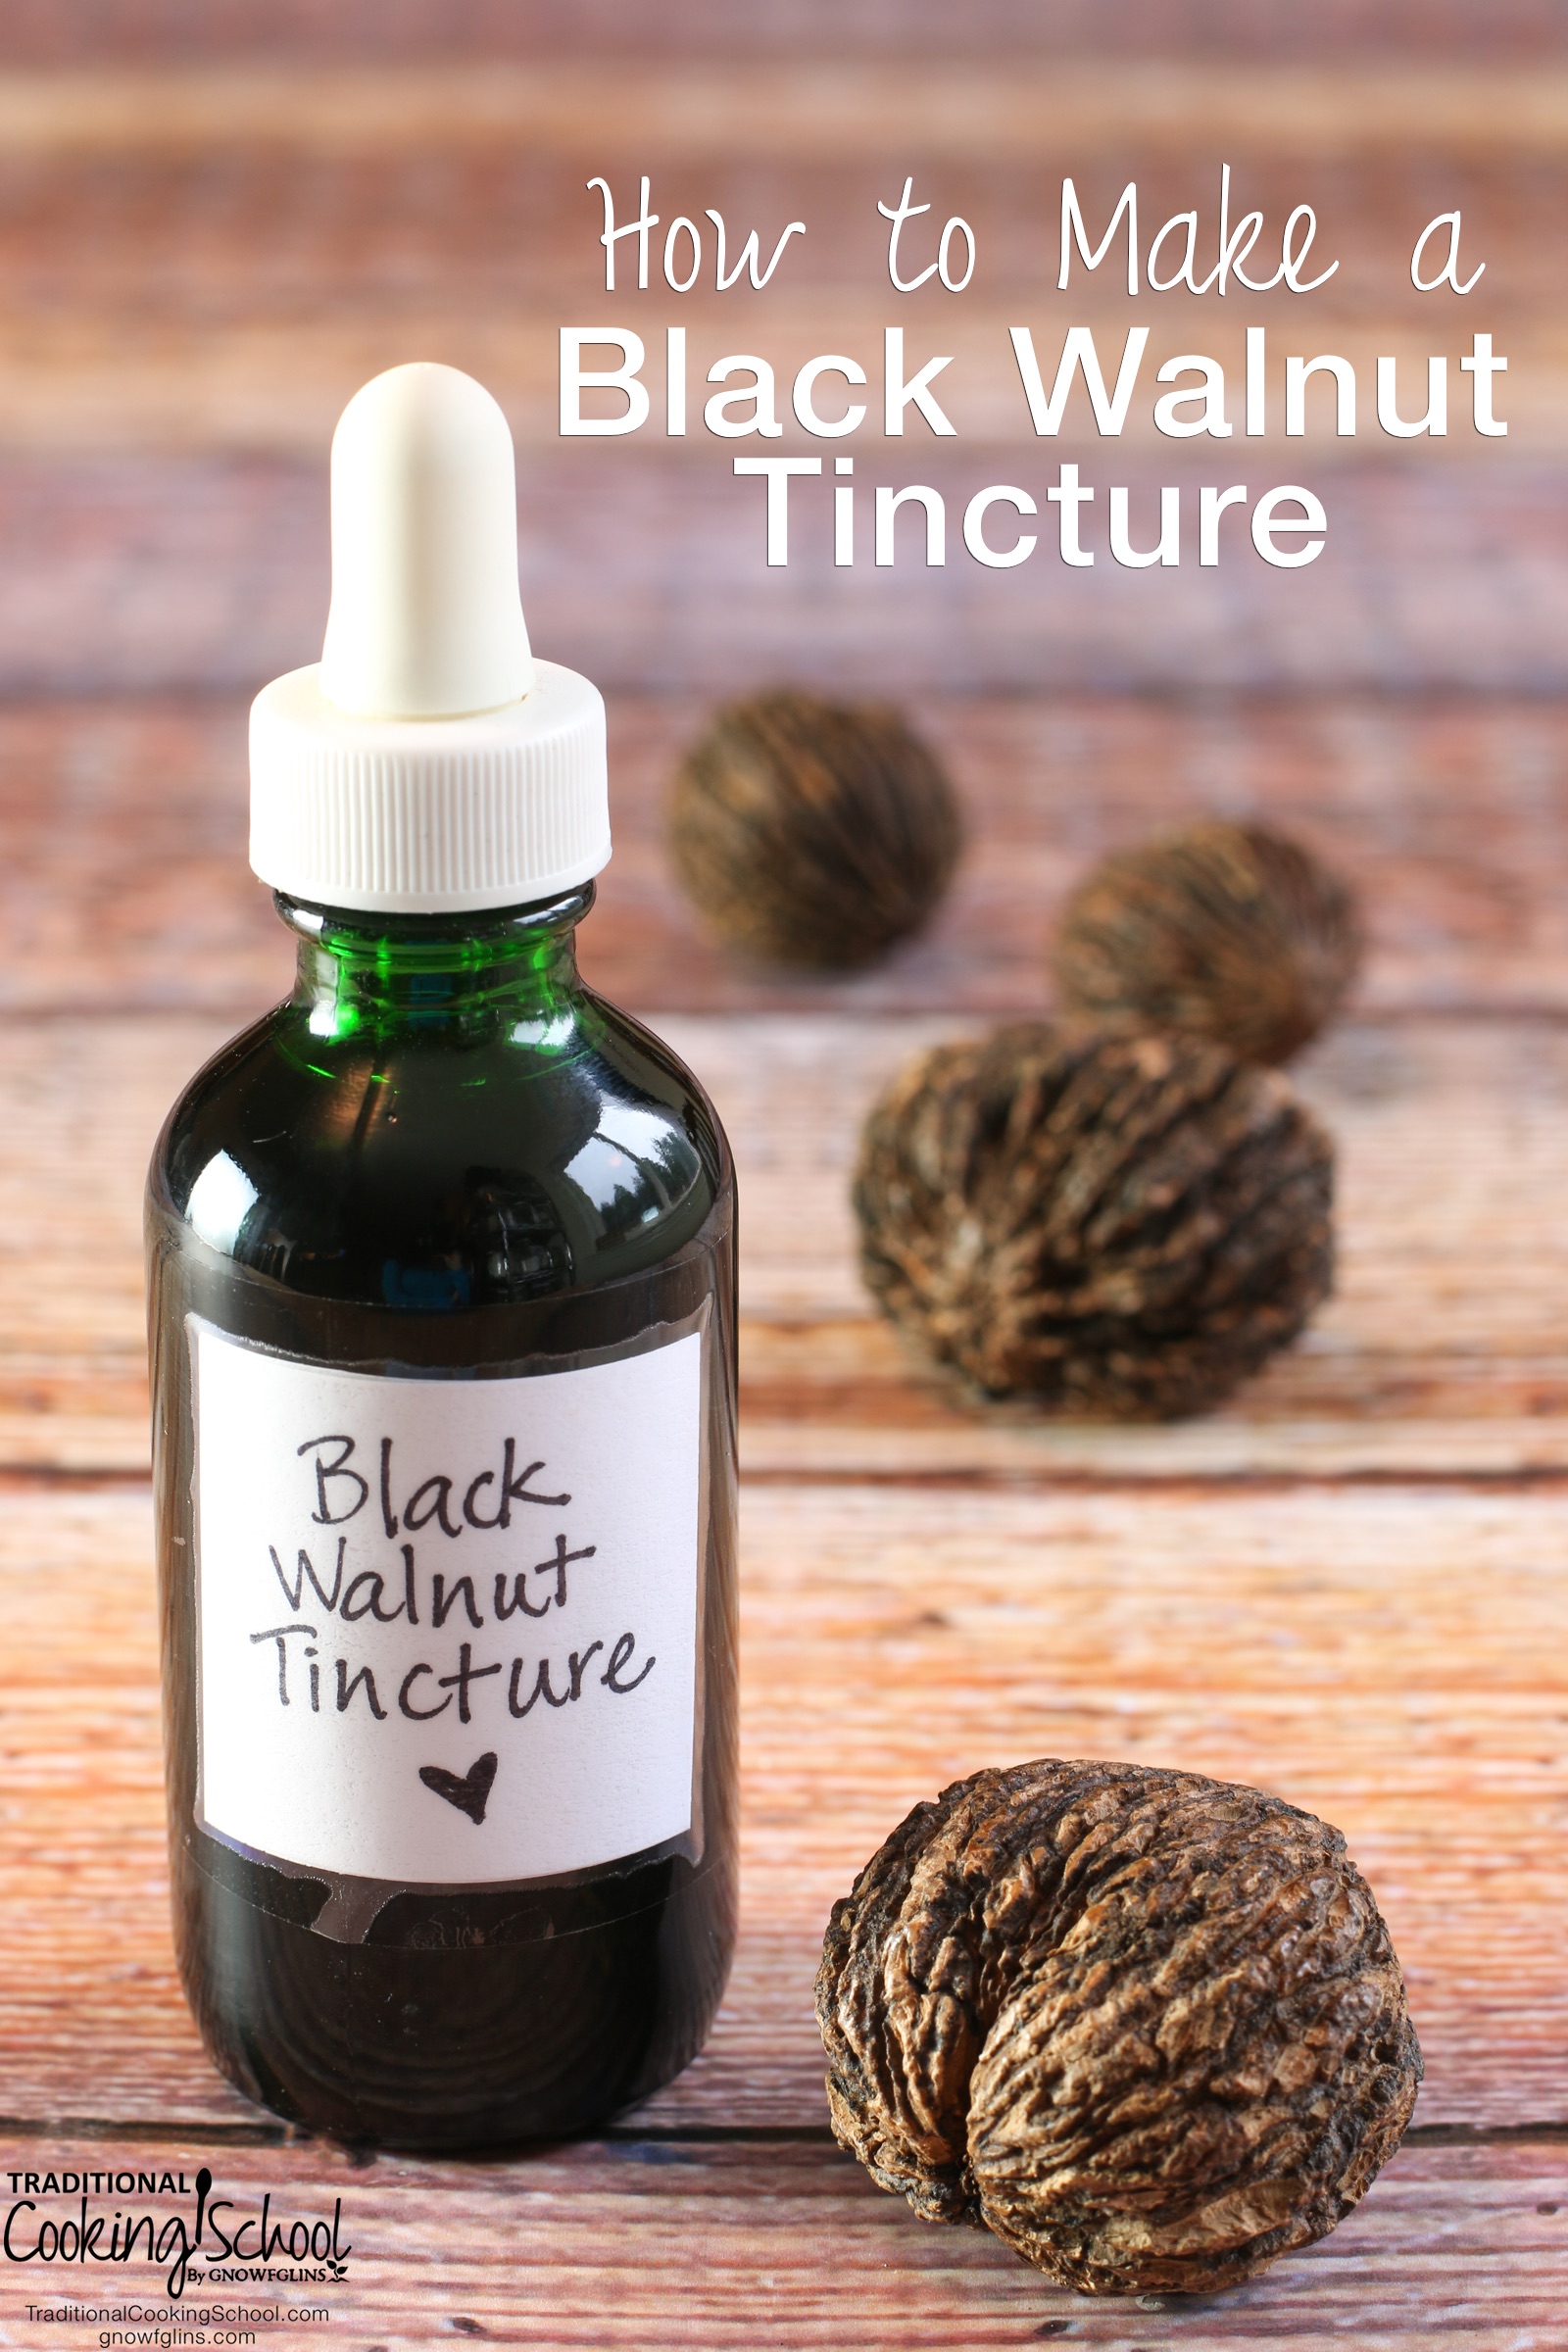 How to Make a Black Walnut Tincture | Just before the cold sets in, God leaves us a final parting gift before winter hibernation... The black walnut tree is ready for harvest. We had been purchasing an herbal mixture for our goats. When we realized the main ingredient was black walnut hull, it was a no-brainer! Time to put these ankle-rollers to good use because black walnuts have amazing properties! | TraditionalCookingSchool.com